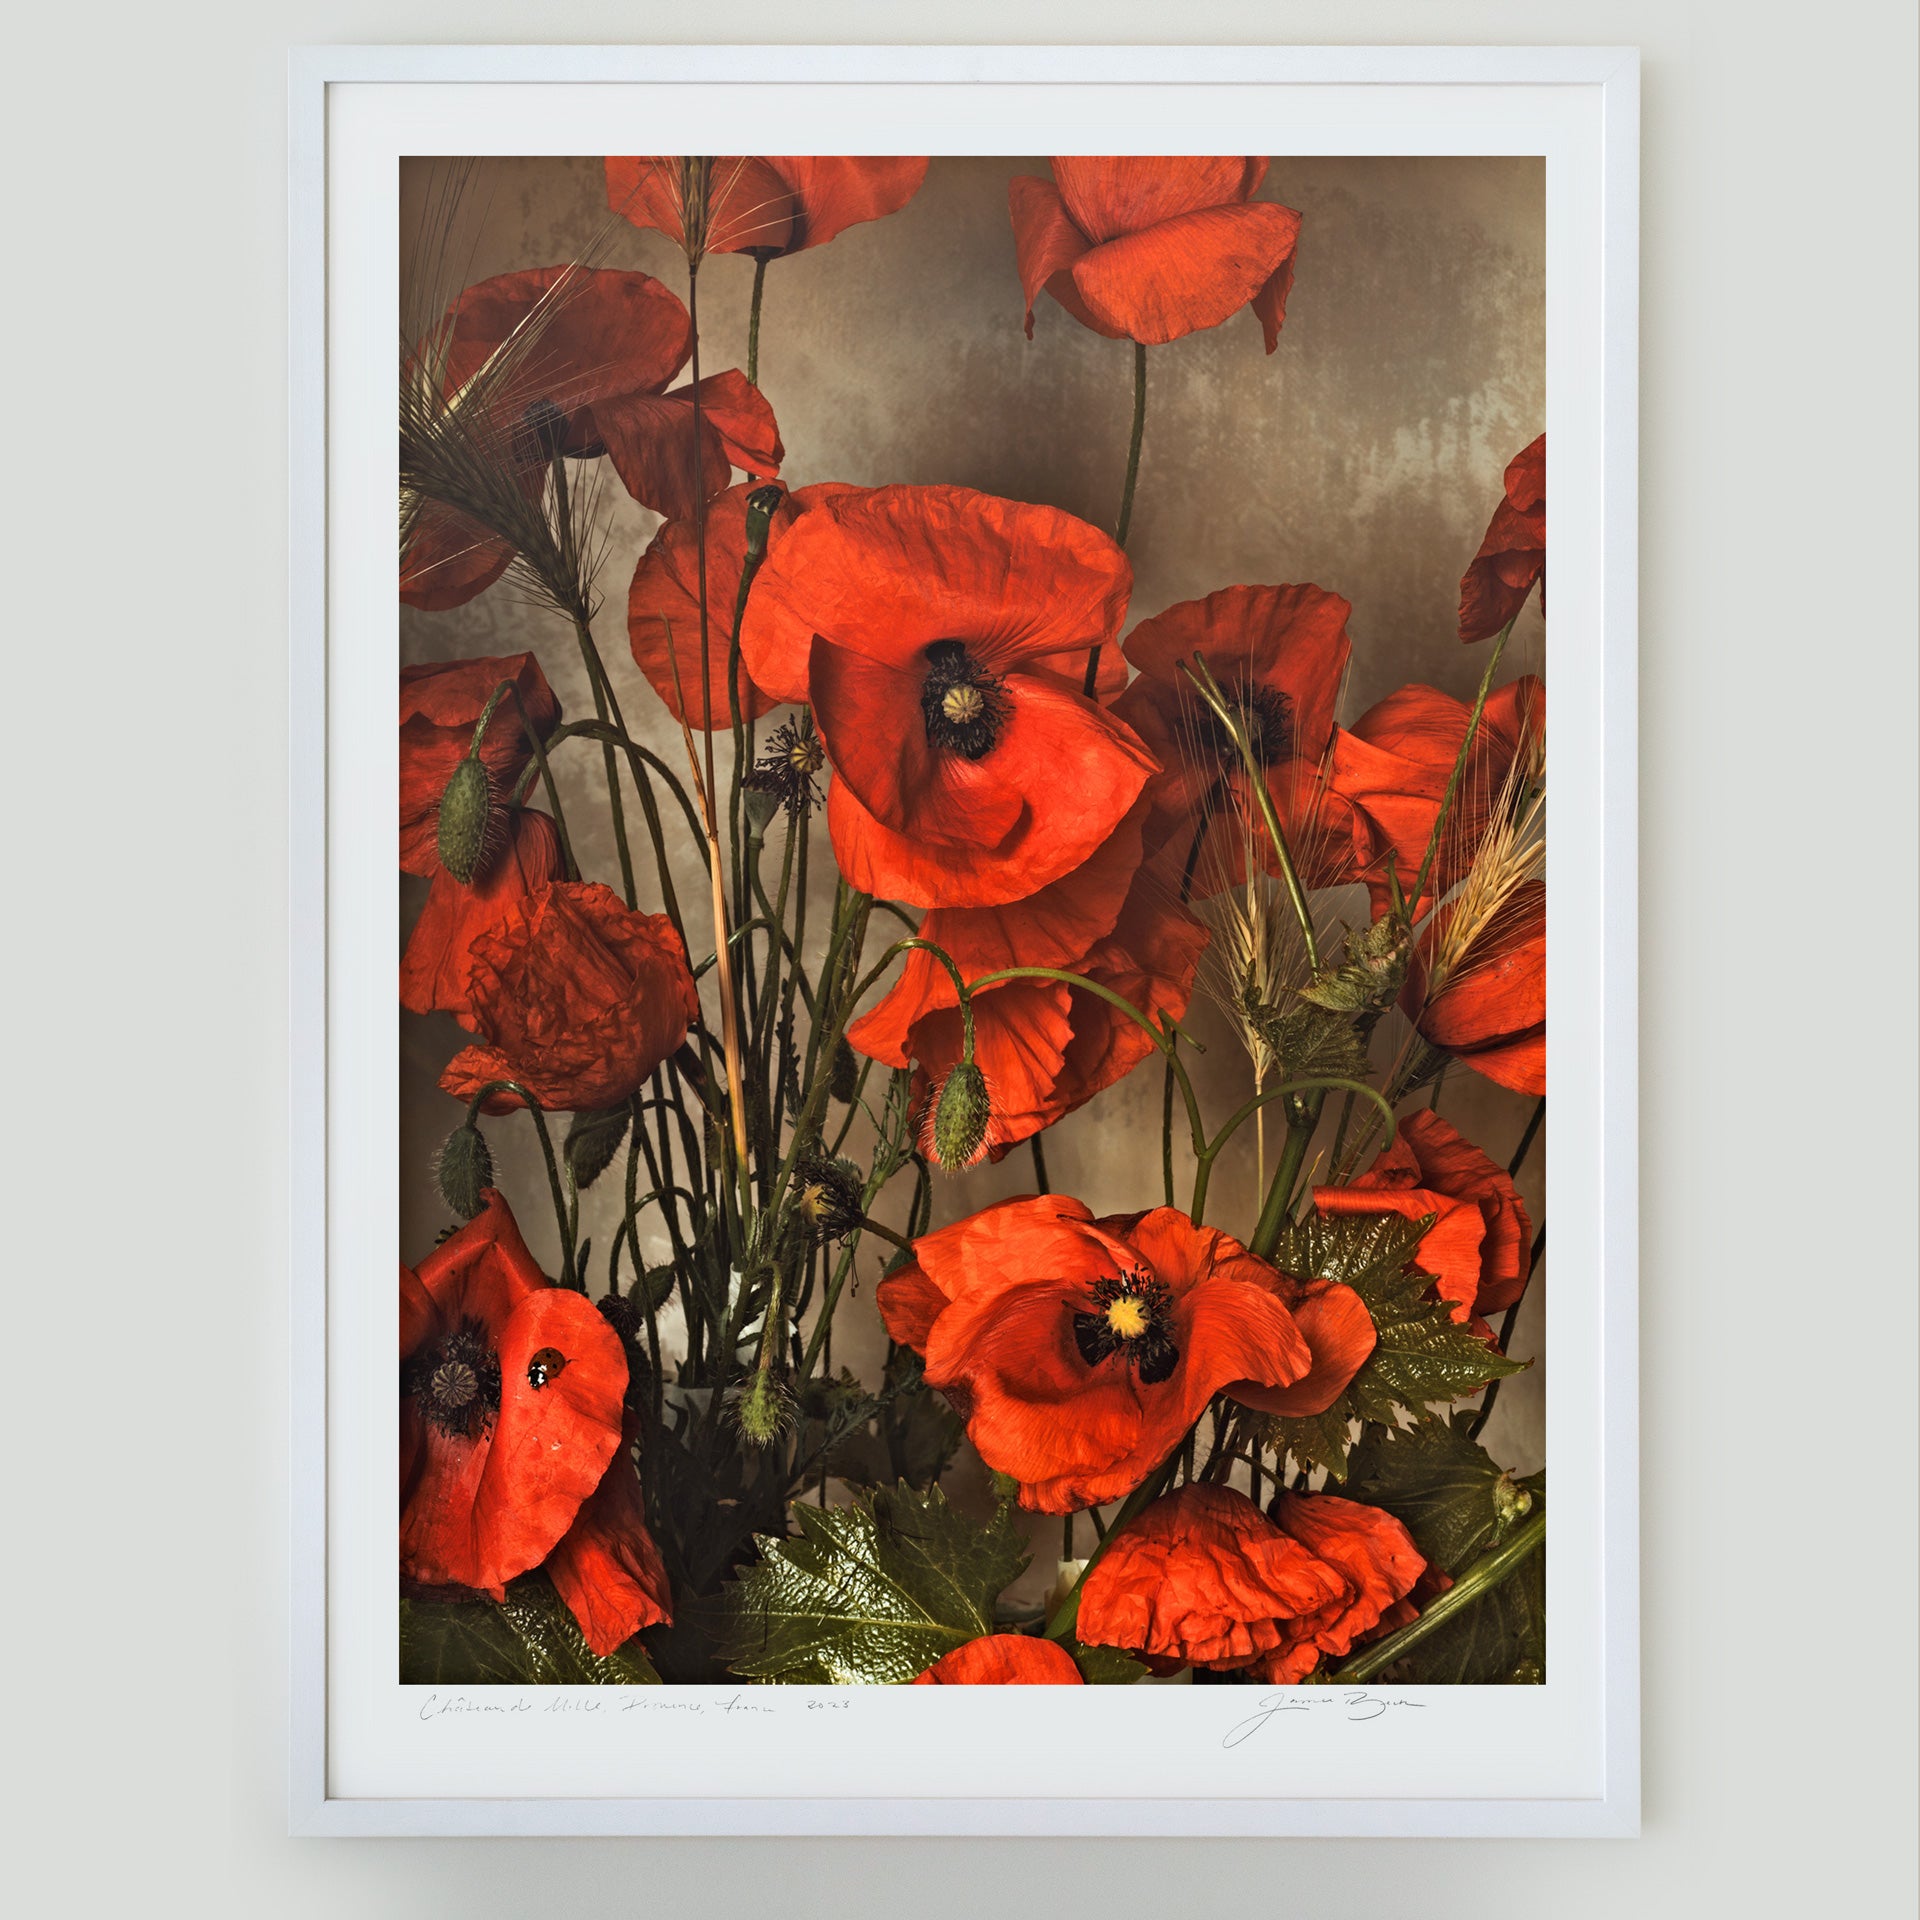 Red Poppies of May • 1 of 1 Framed Exhibition Piece